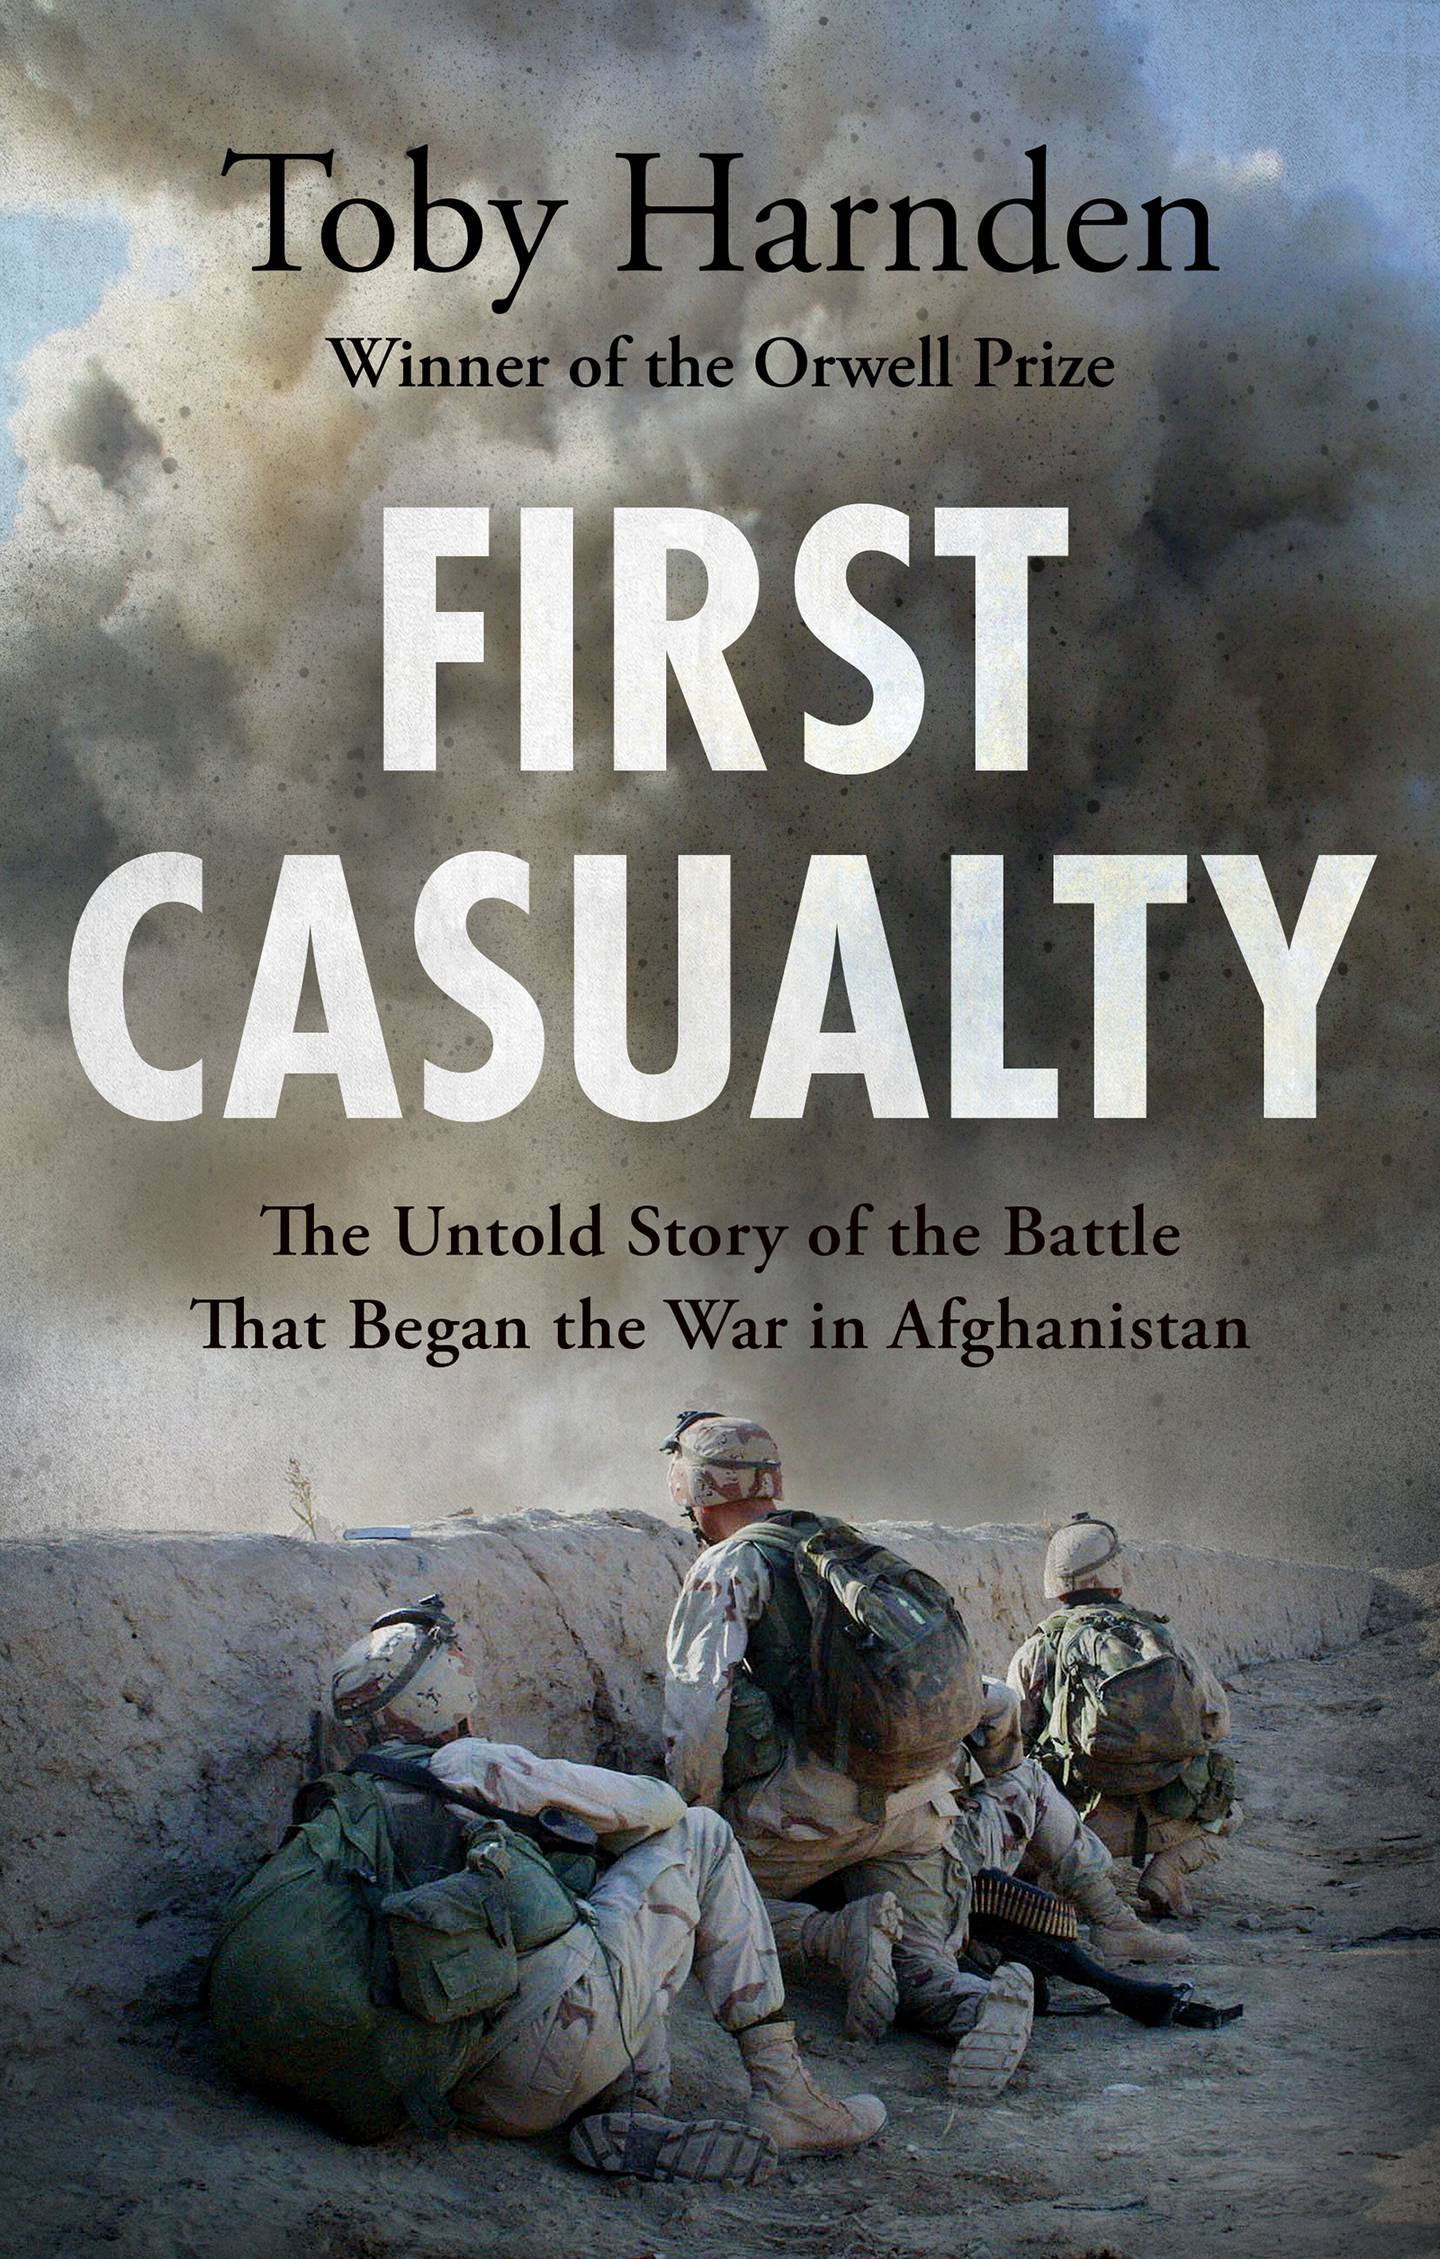 'First Casualty: The Untold Story of the Battle that Began the War in Afghanistan' by Toby Harnden. Photo: Welbeck Publishing